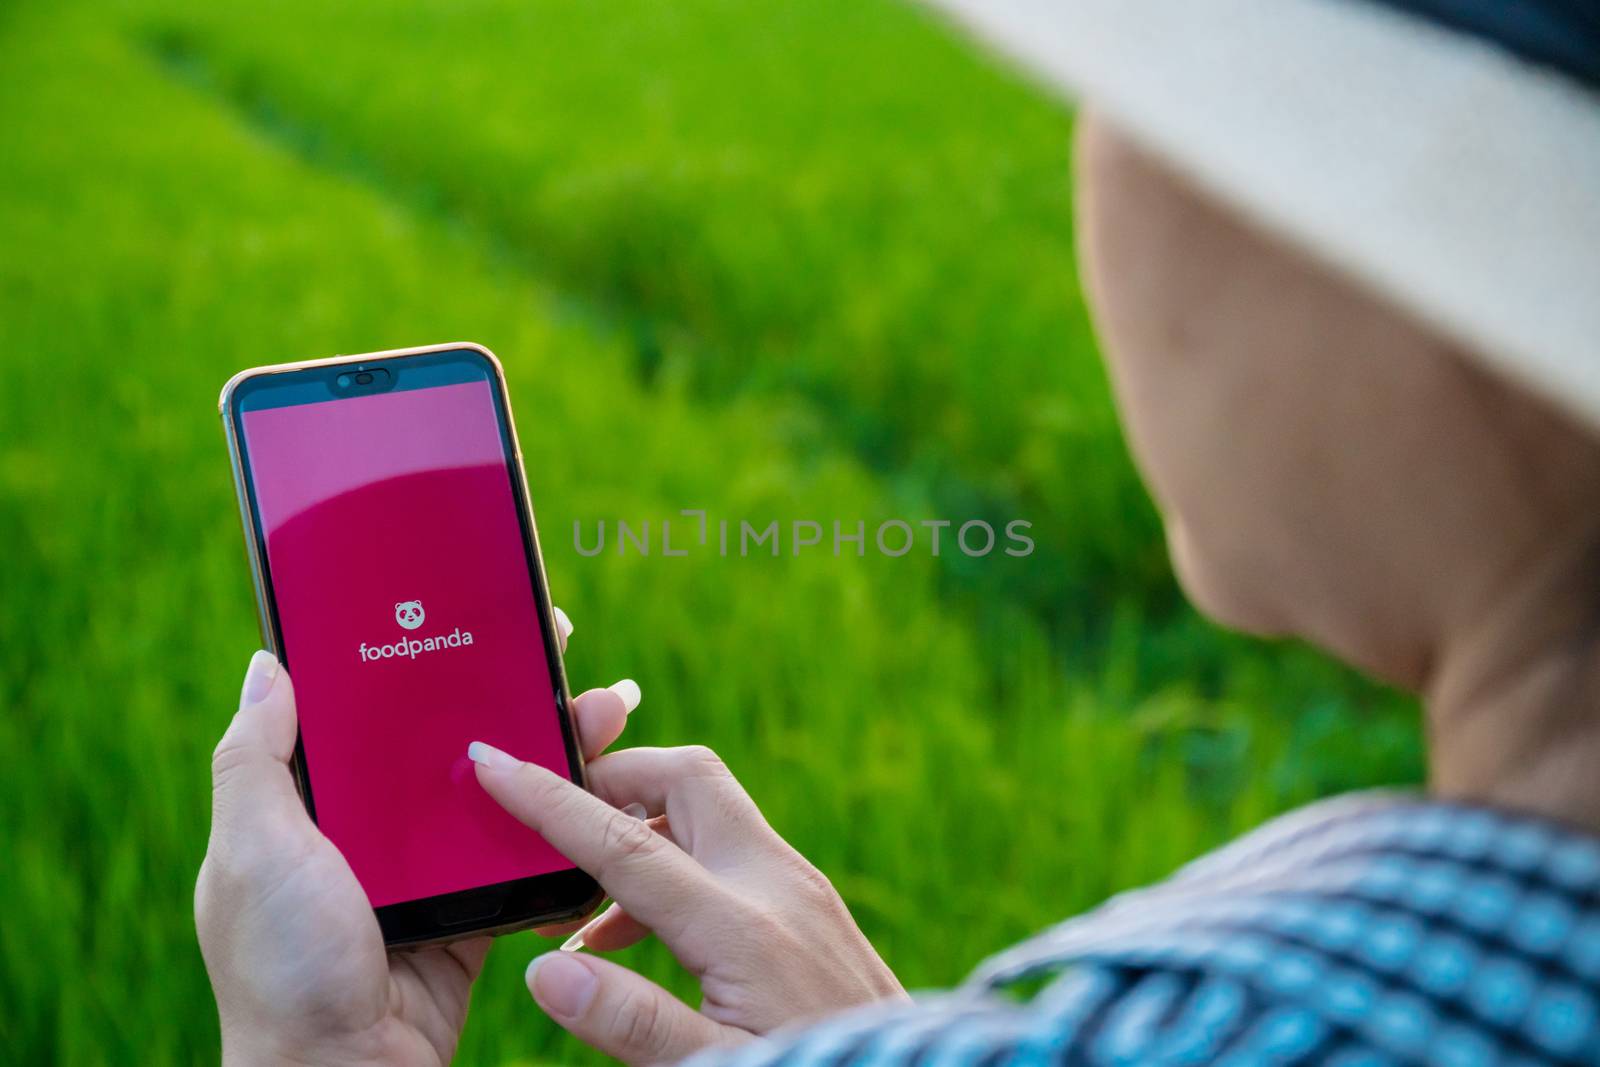 Chiang mai, Thailand - October 16, 2019: Rural women are using the Foodpanda application when she is in the fields